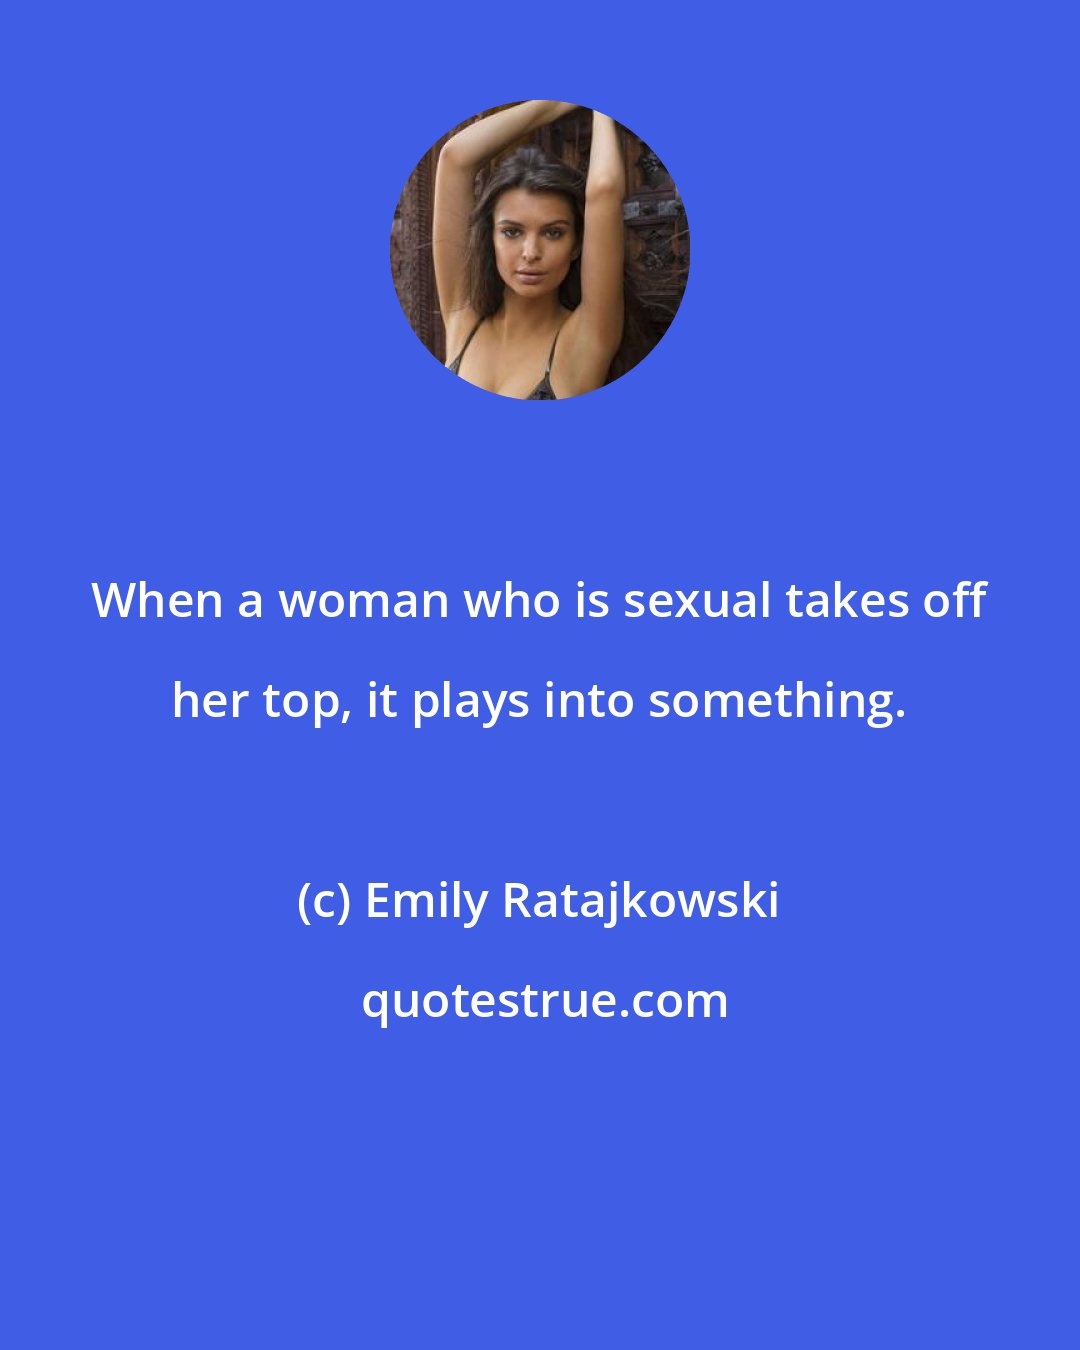 Emily Ratajkowski: When a woman who is sexual takes off her top, it plays into something.